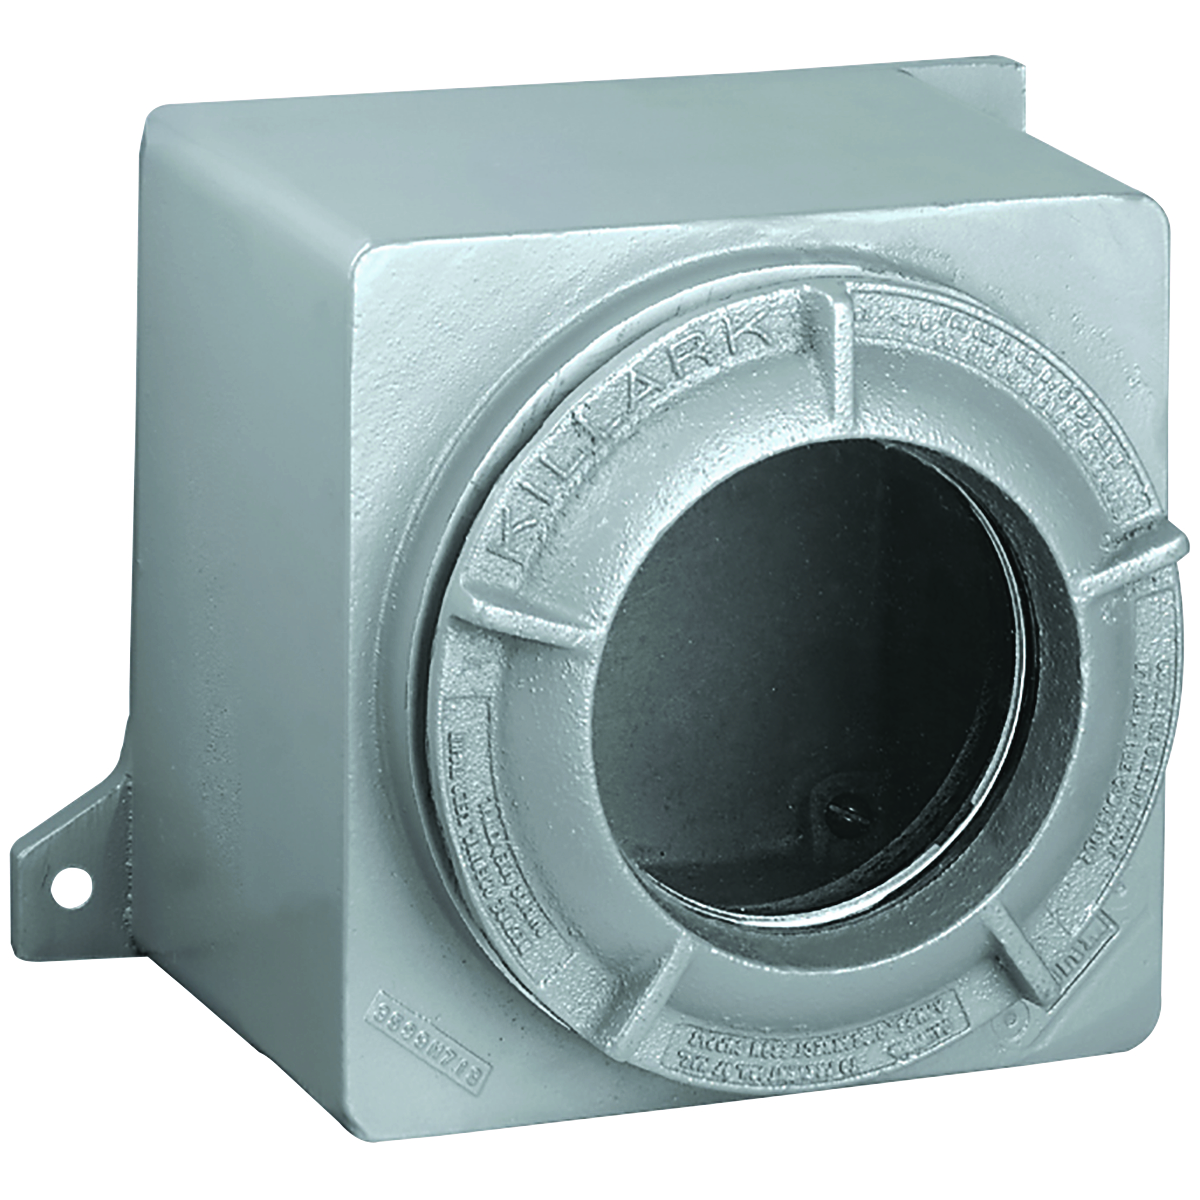 GR SERIES - THREADED BOX WITH LENS COVER - COVER OPENING DIAMETER4-11/32 IN - VIEWING AREA 3 IN - MAXIMUM CONDUIT SIZE 2 IN